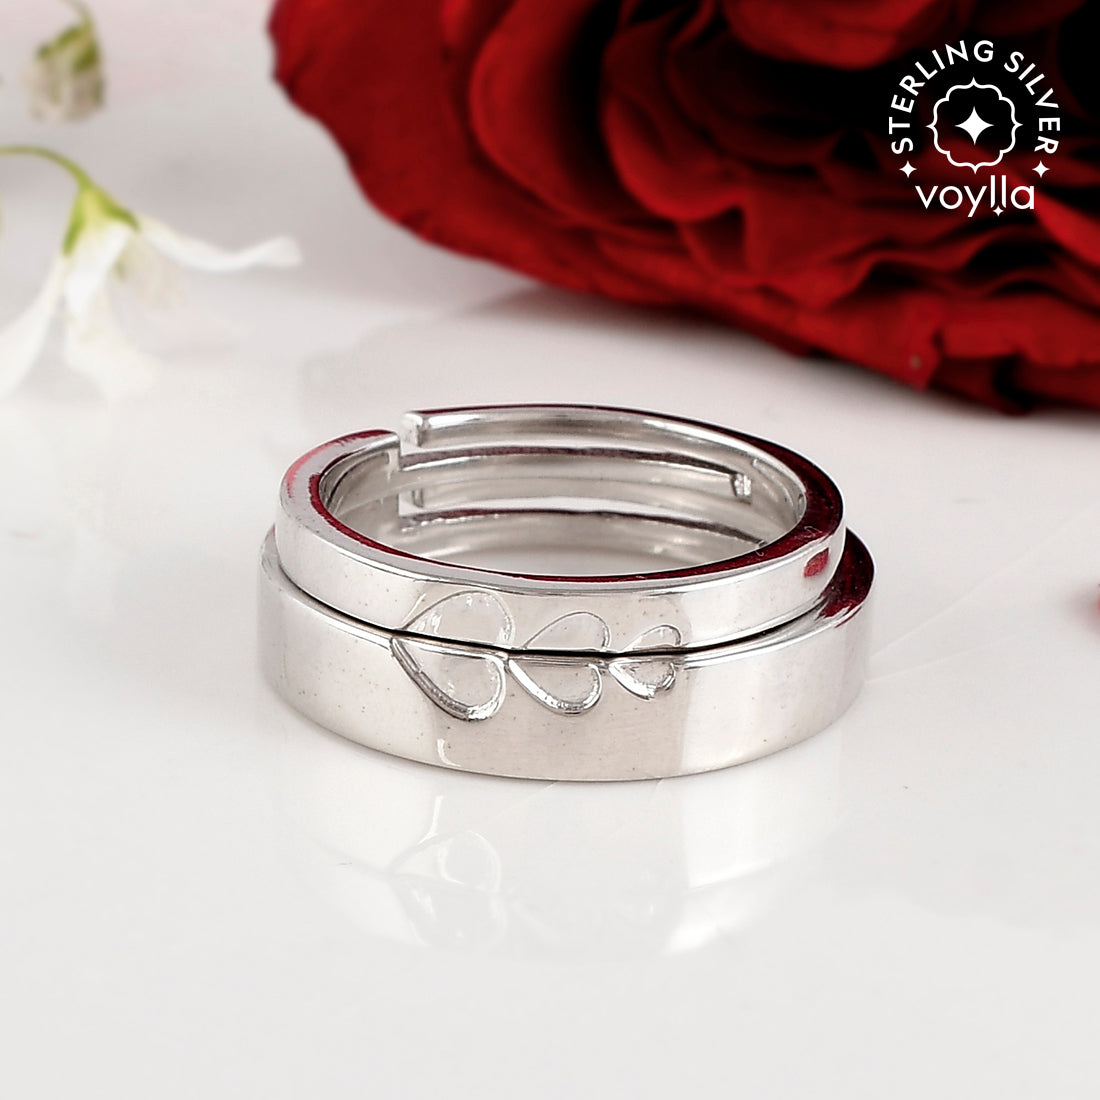 Buy Silver and Copper Ring online @ Best price in India - Rudra Centre